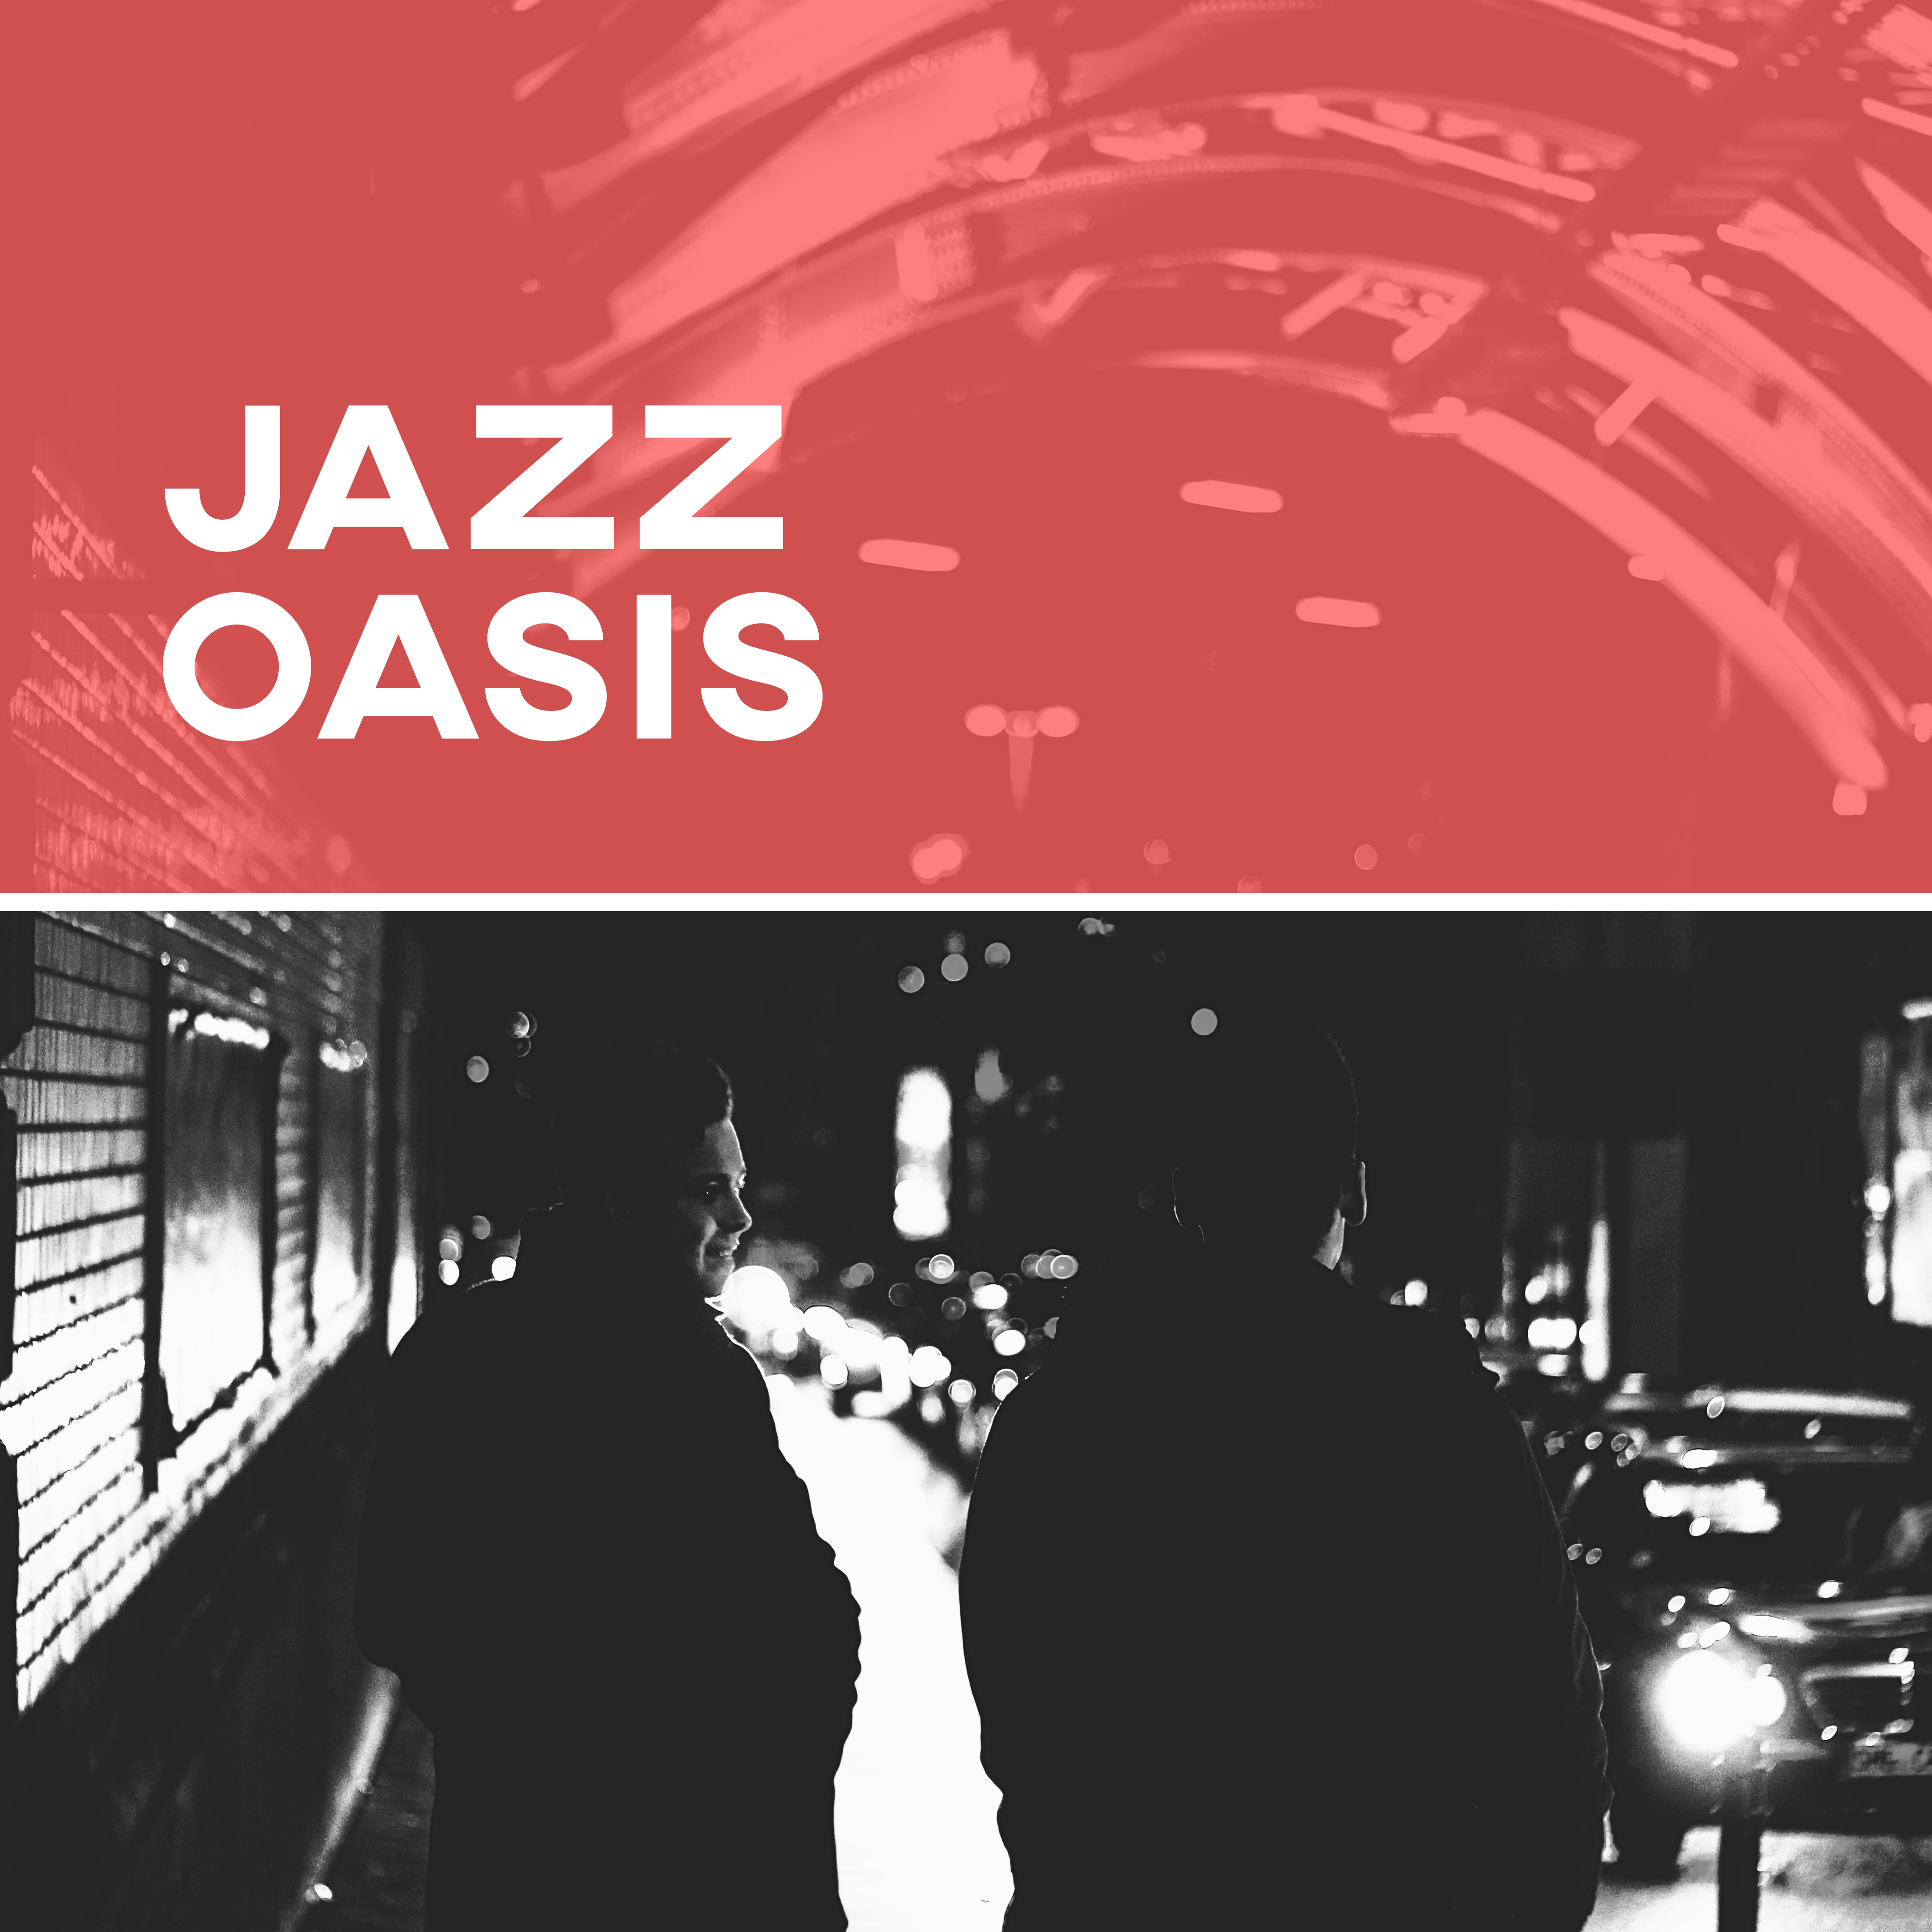 Jazz Oasis  Ambient Piano Music, Sensual Jazz, Romantic Dinner, Date with Candle Light , Smooth Jazz